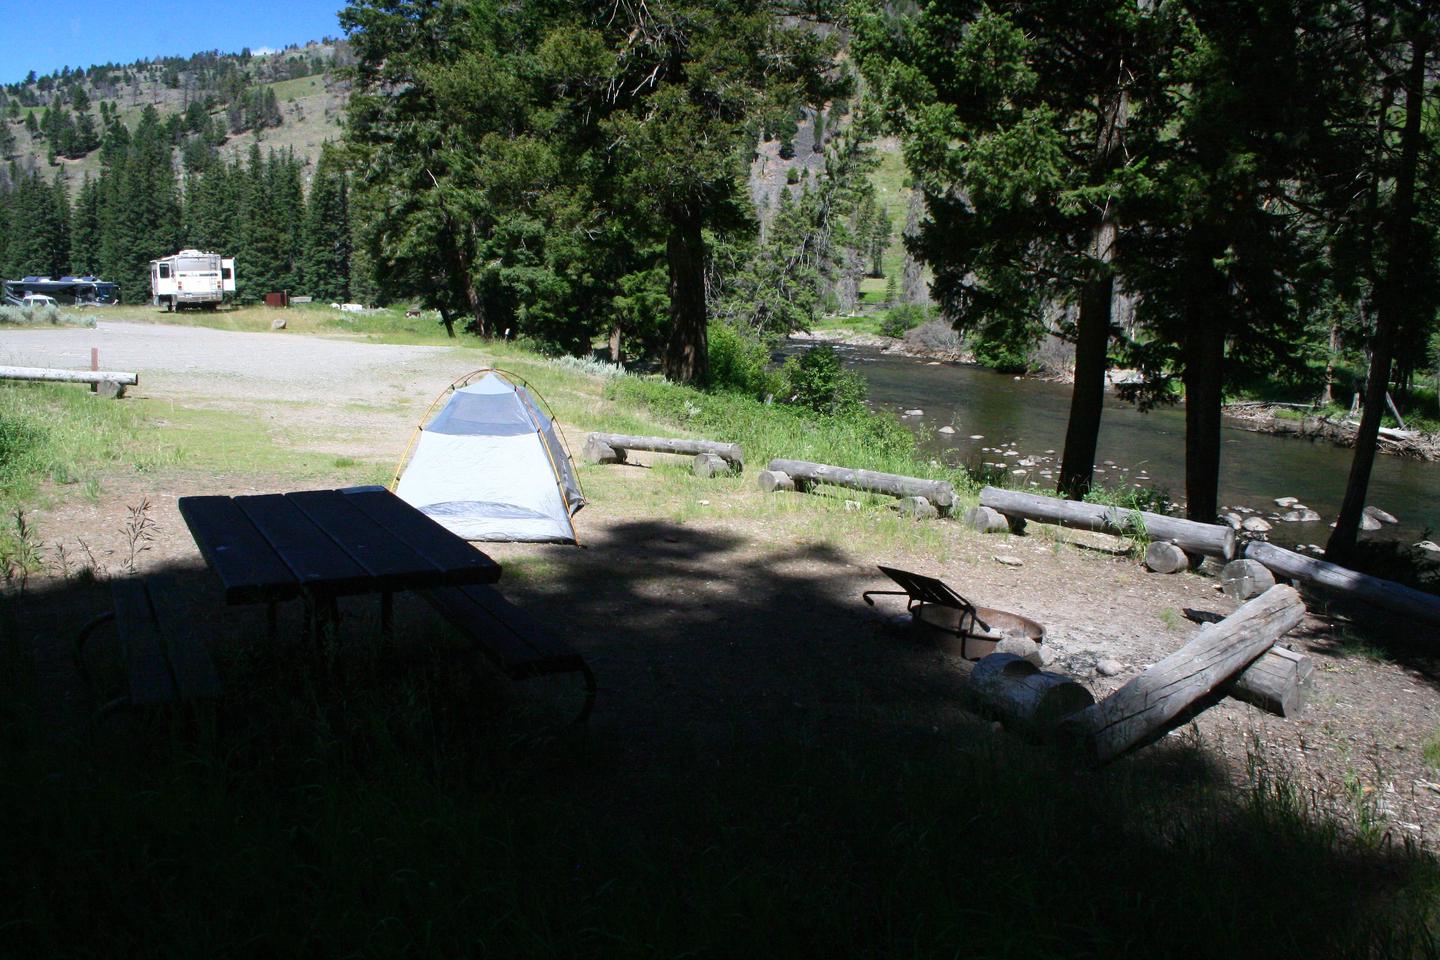 Slough Creek Campground Site #1.Slough Creek Campground Site #1